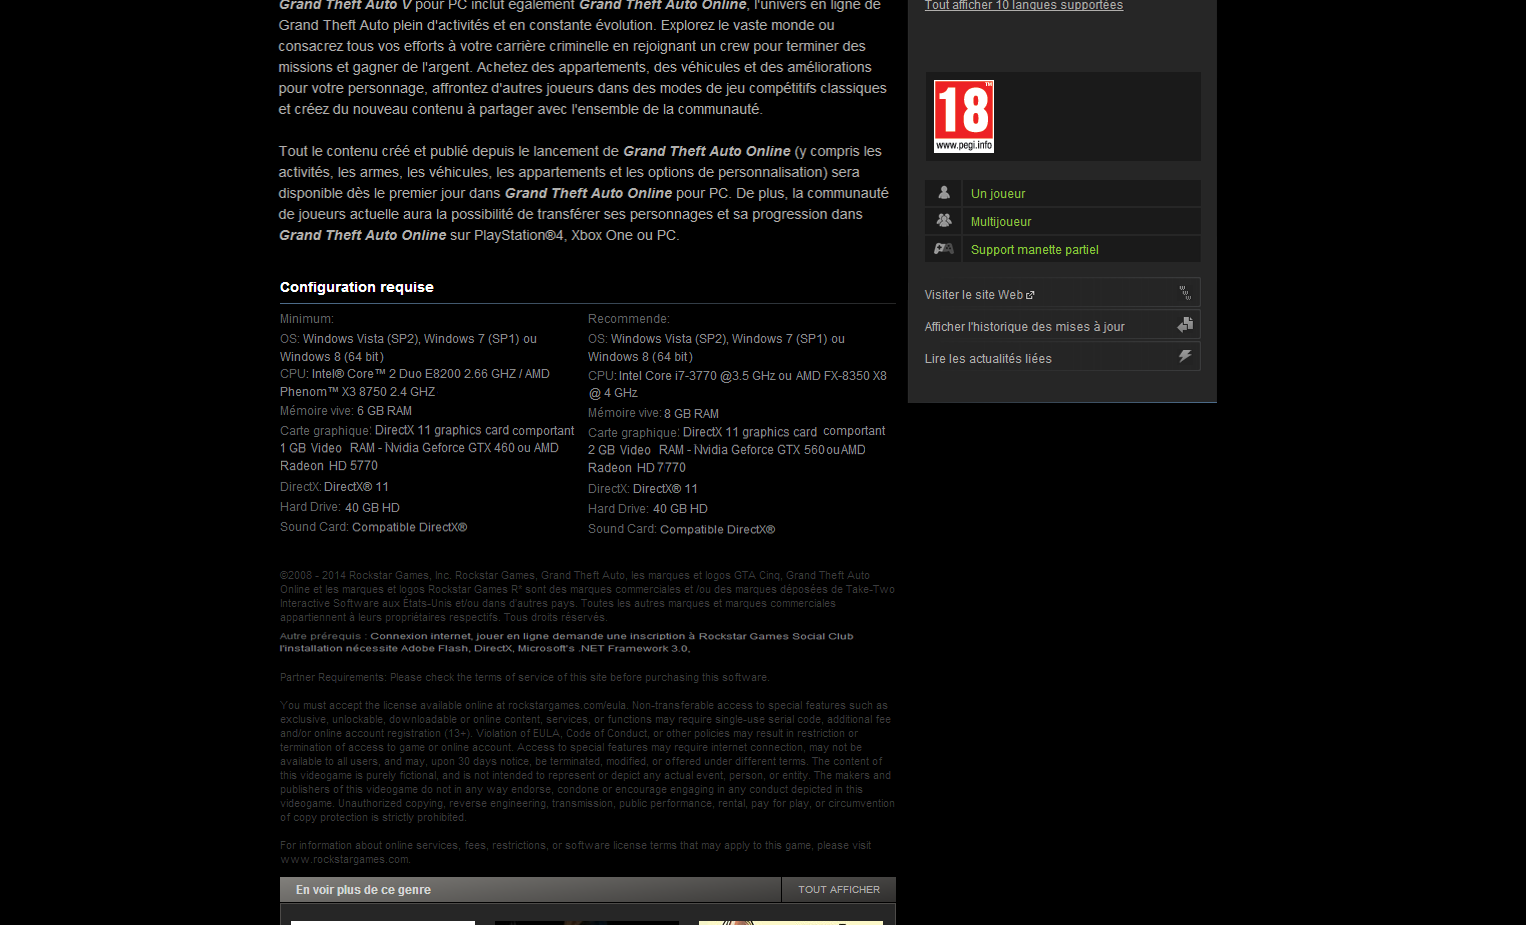 Grand Theft Auto V PC System Requirement Thread - Page 20 - GTA V